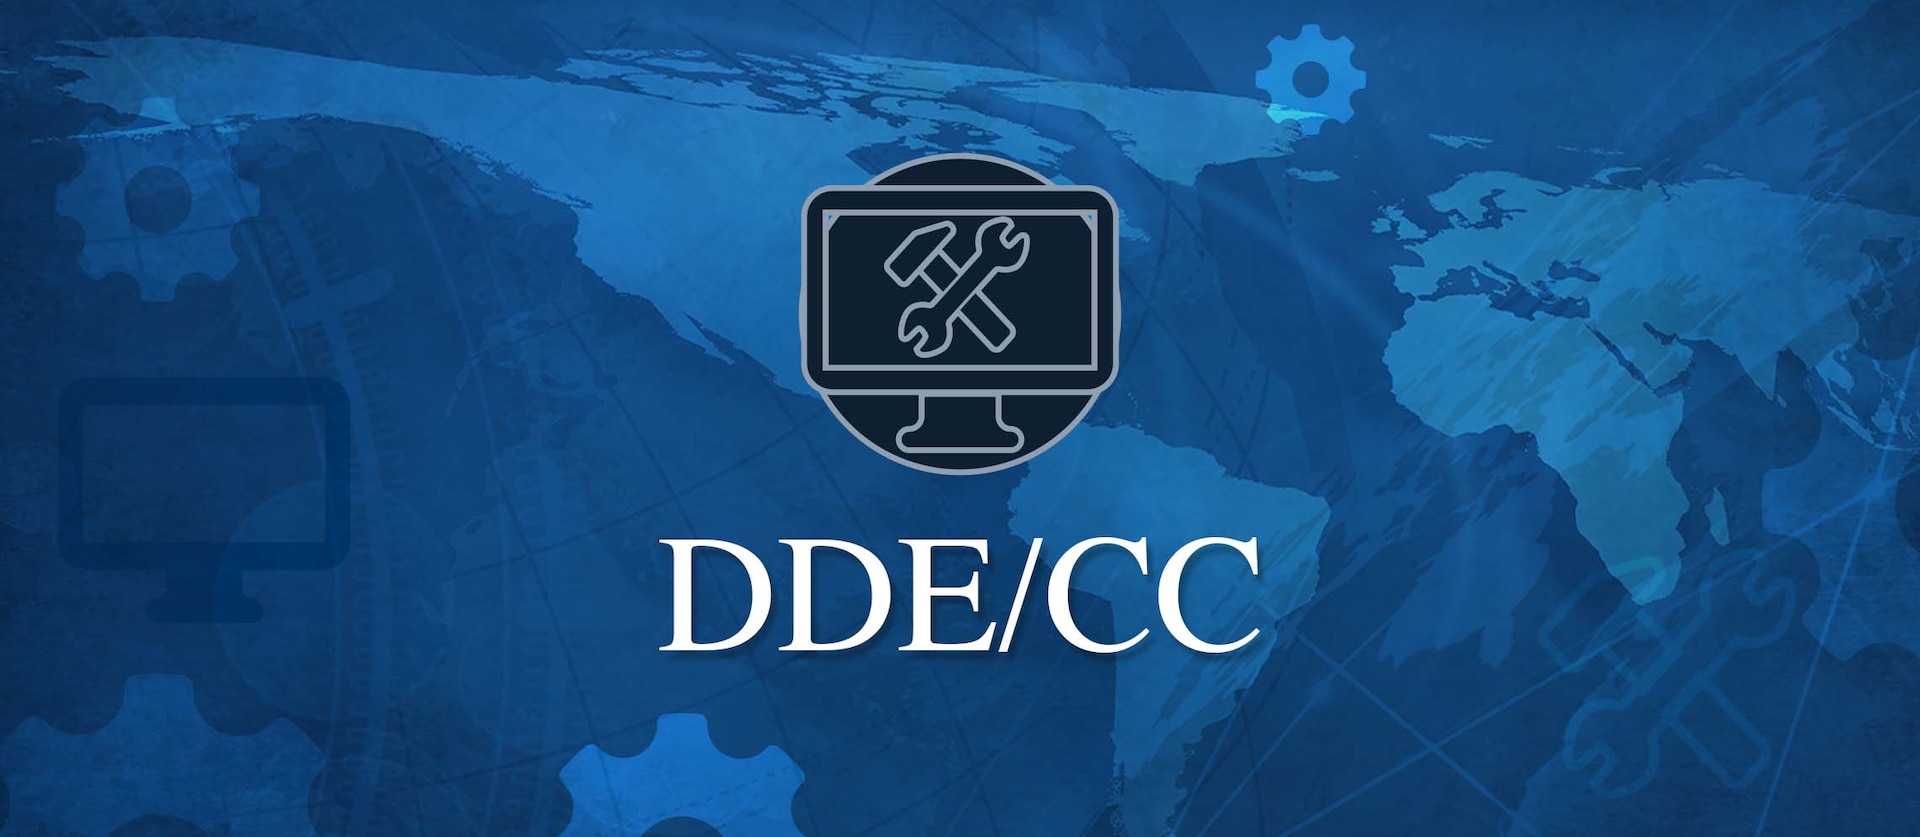 Banner graphic for DDE/CC application